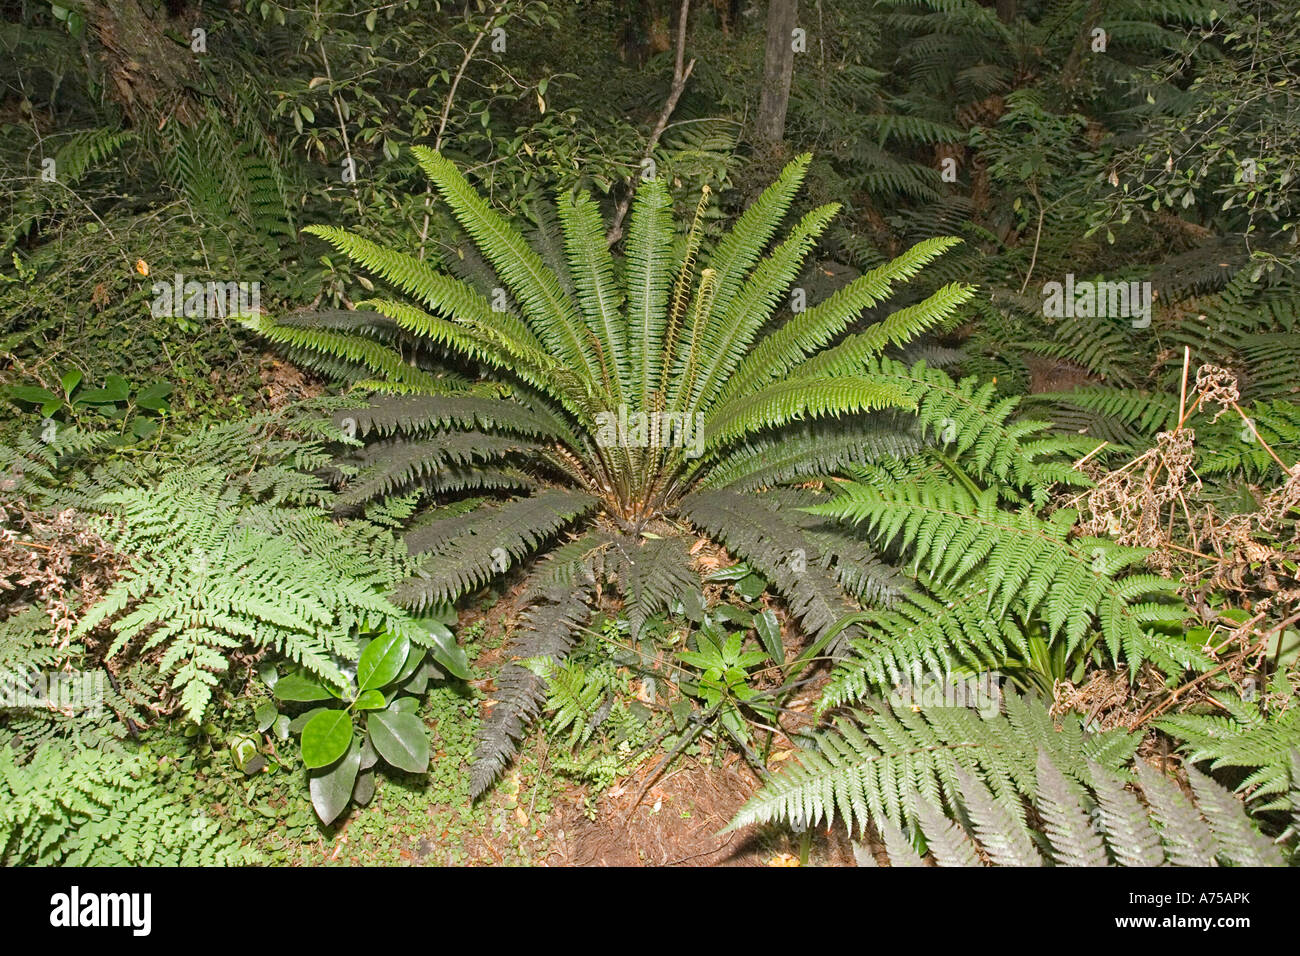 Ferns On Forest Floor Lake Wilkie Near Tautuku Bay Catlins New